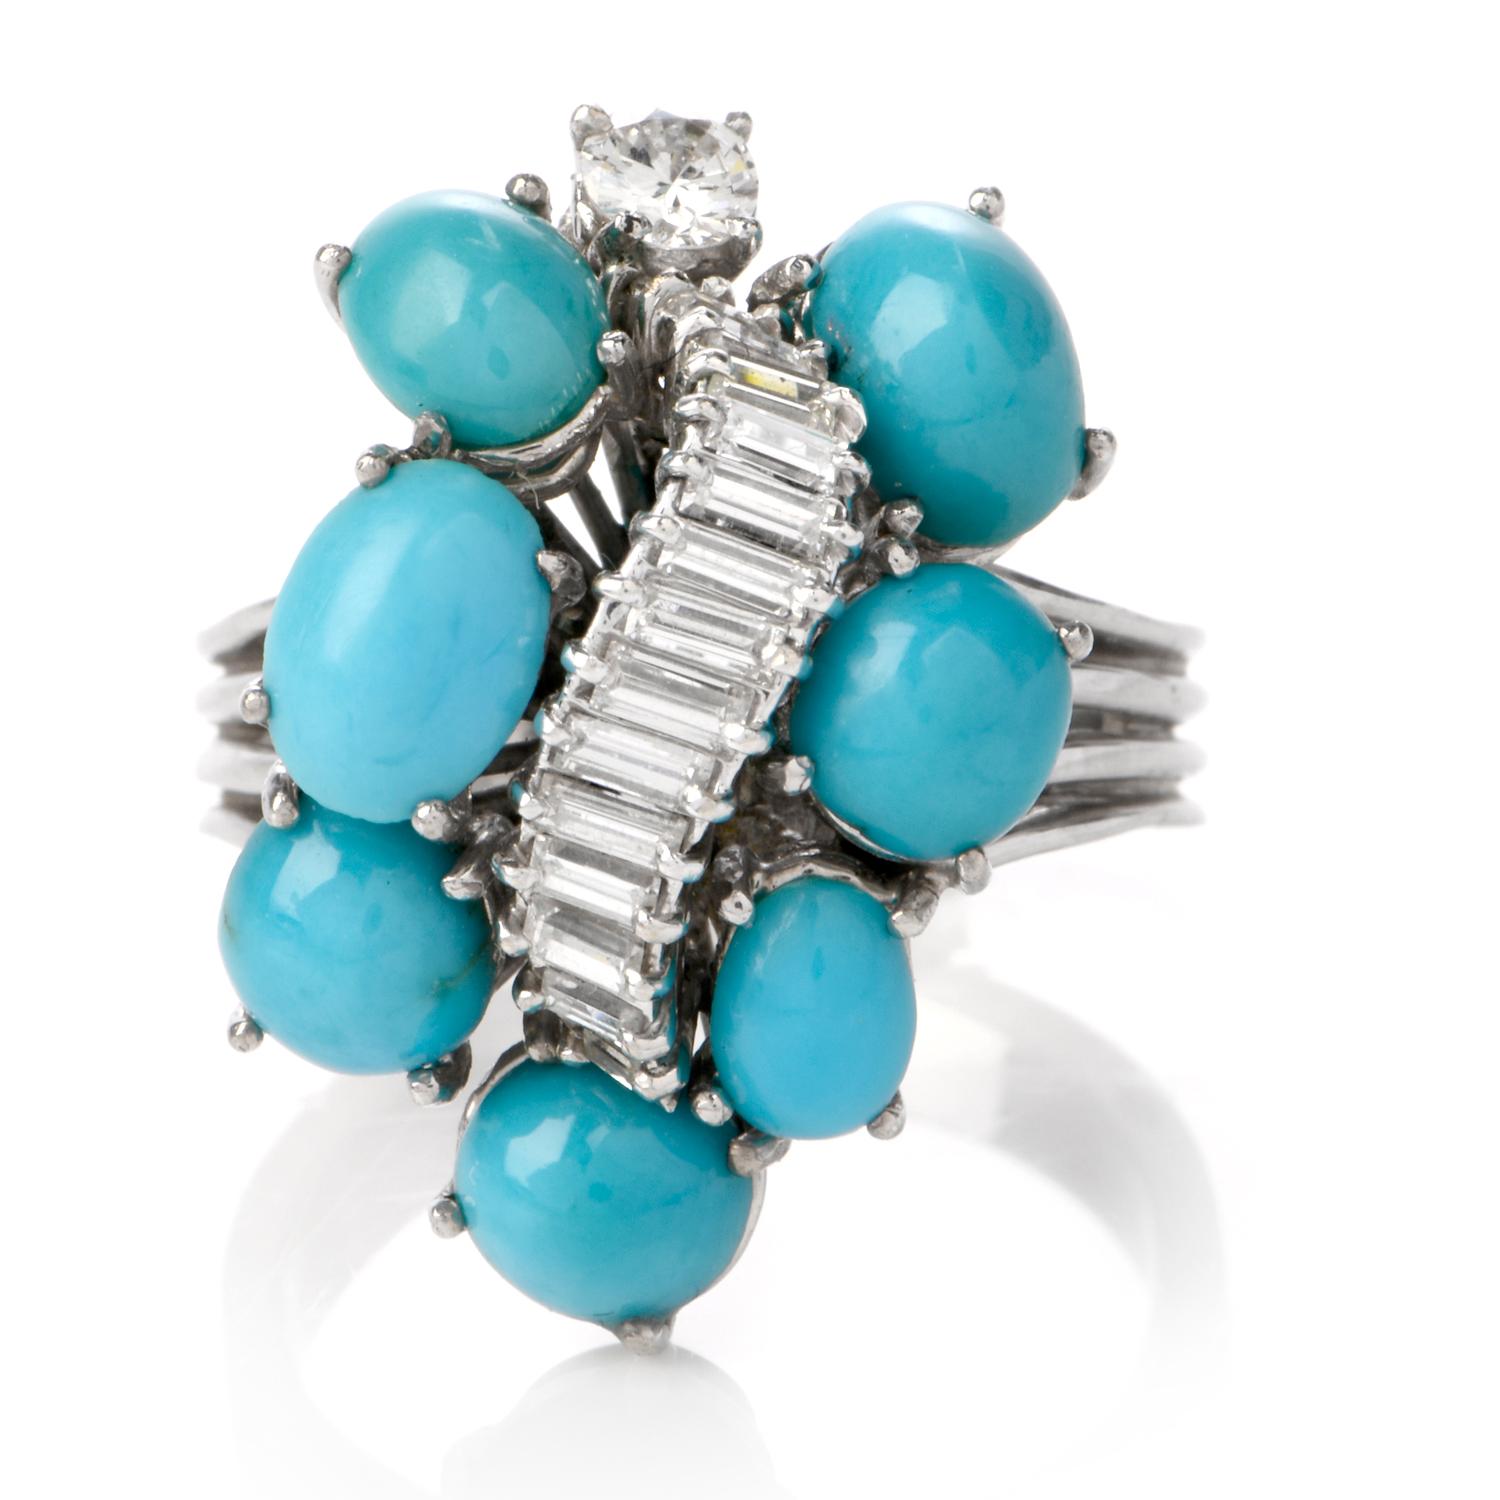 This beautiful vintage Gübelin diamond and turquoise cocktail ring is crafted in 18-karat white gold, weighing 6.8 grams and measuring 22mm wide x 10mm high. Composed of seven prong-set Persian turquoise cabochons of round and oval shapes approx.